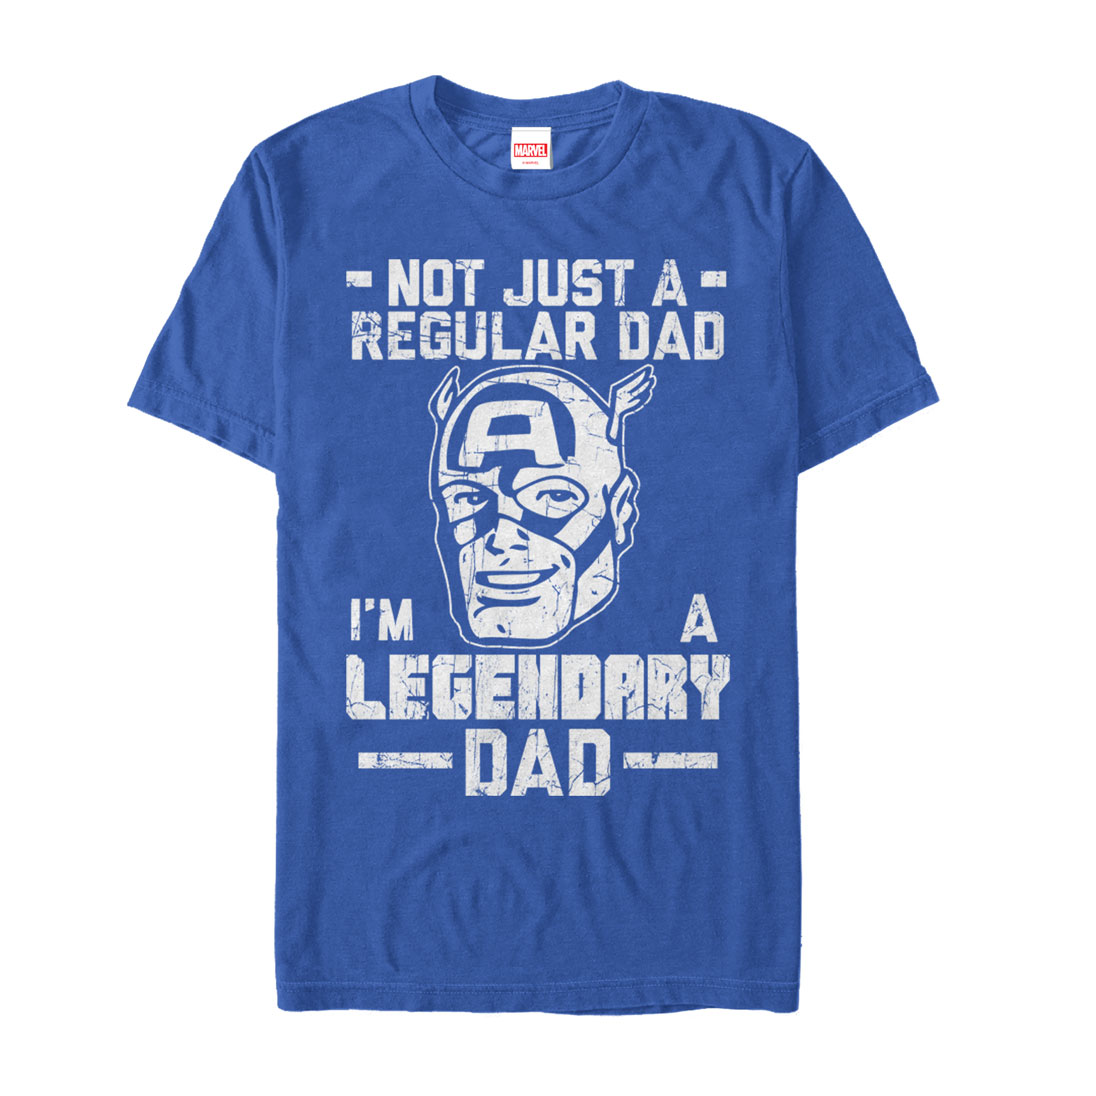 Daddy is a superhero to you, right? So, this Father’s day, get him a Dad T-Shirt with a portrait of Captain America and the slogan "Not Just a Regular Dad. I'm a Legendary Dad". A unique gift to let your old man know that he is the legend in your heart.